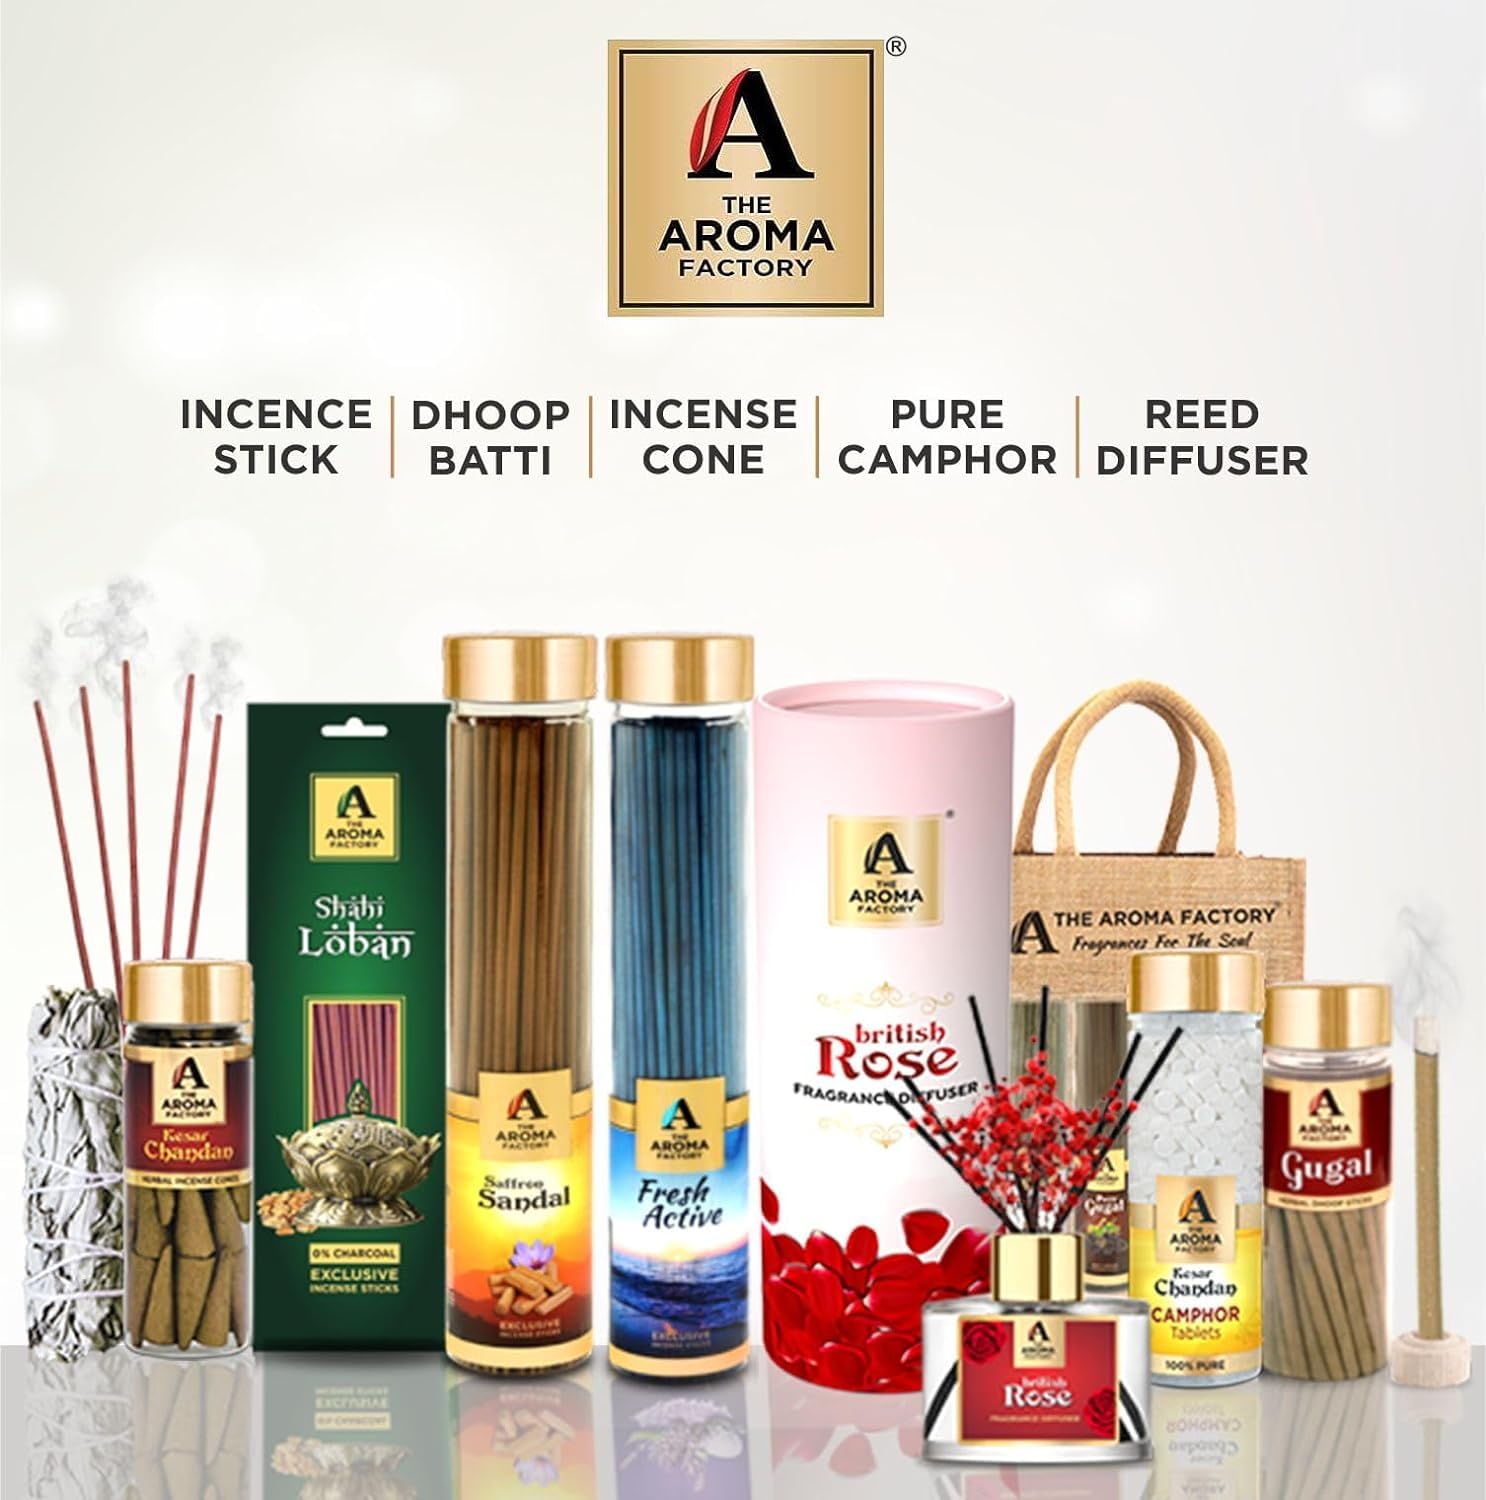 The Aroma Factory Happy Birthday Dada Grand Dad Gift with Card (25 Swad Candy, Pineapple Agarbatti Bottle, Mogra Cone) in Jute Bag